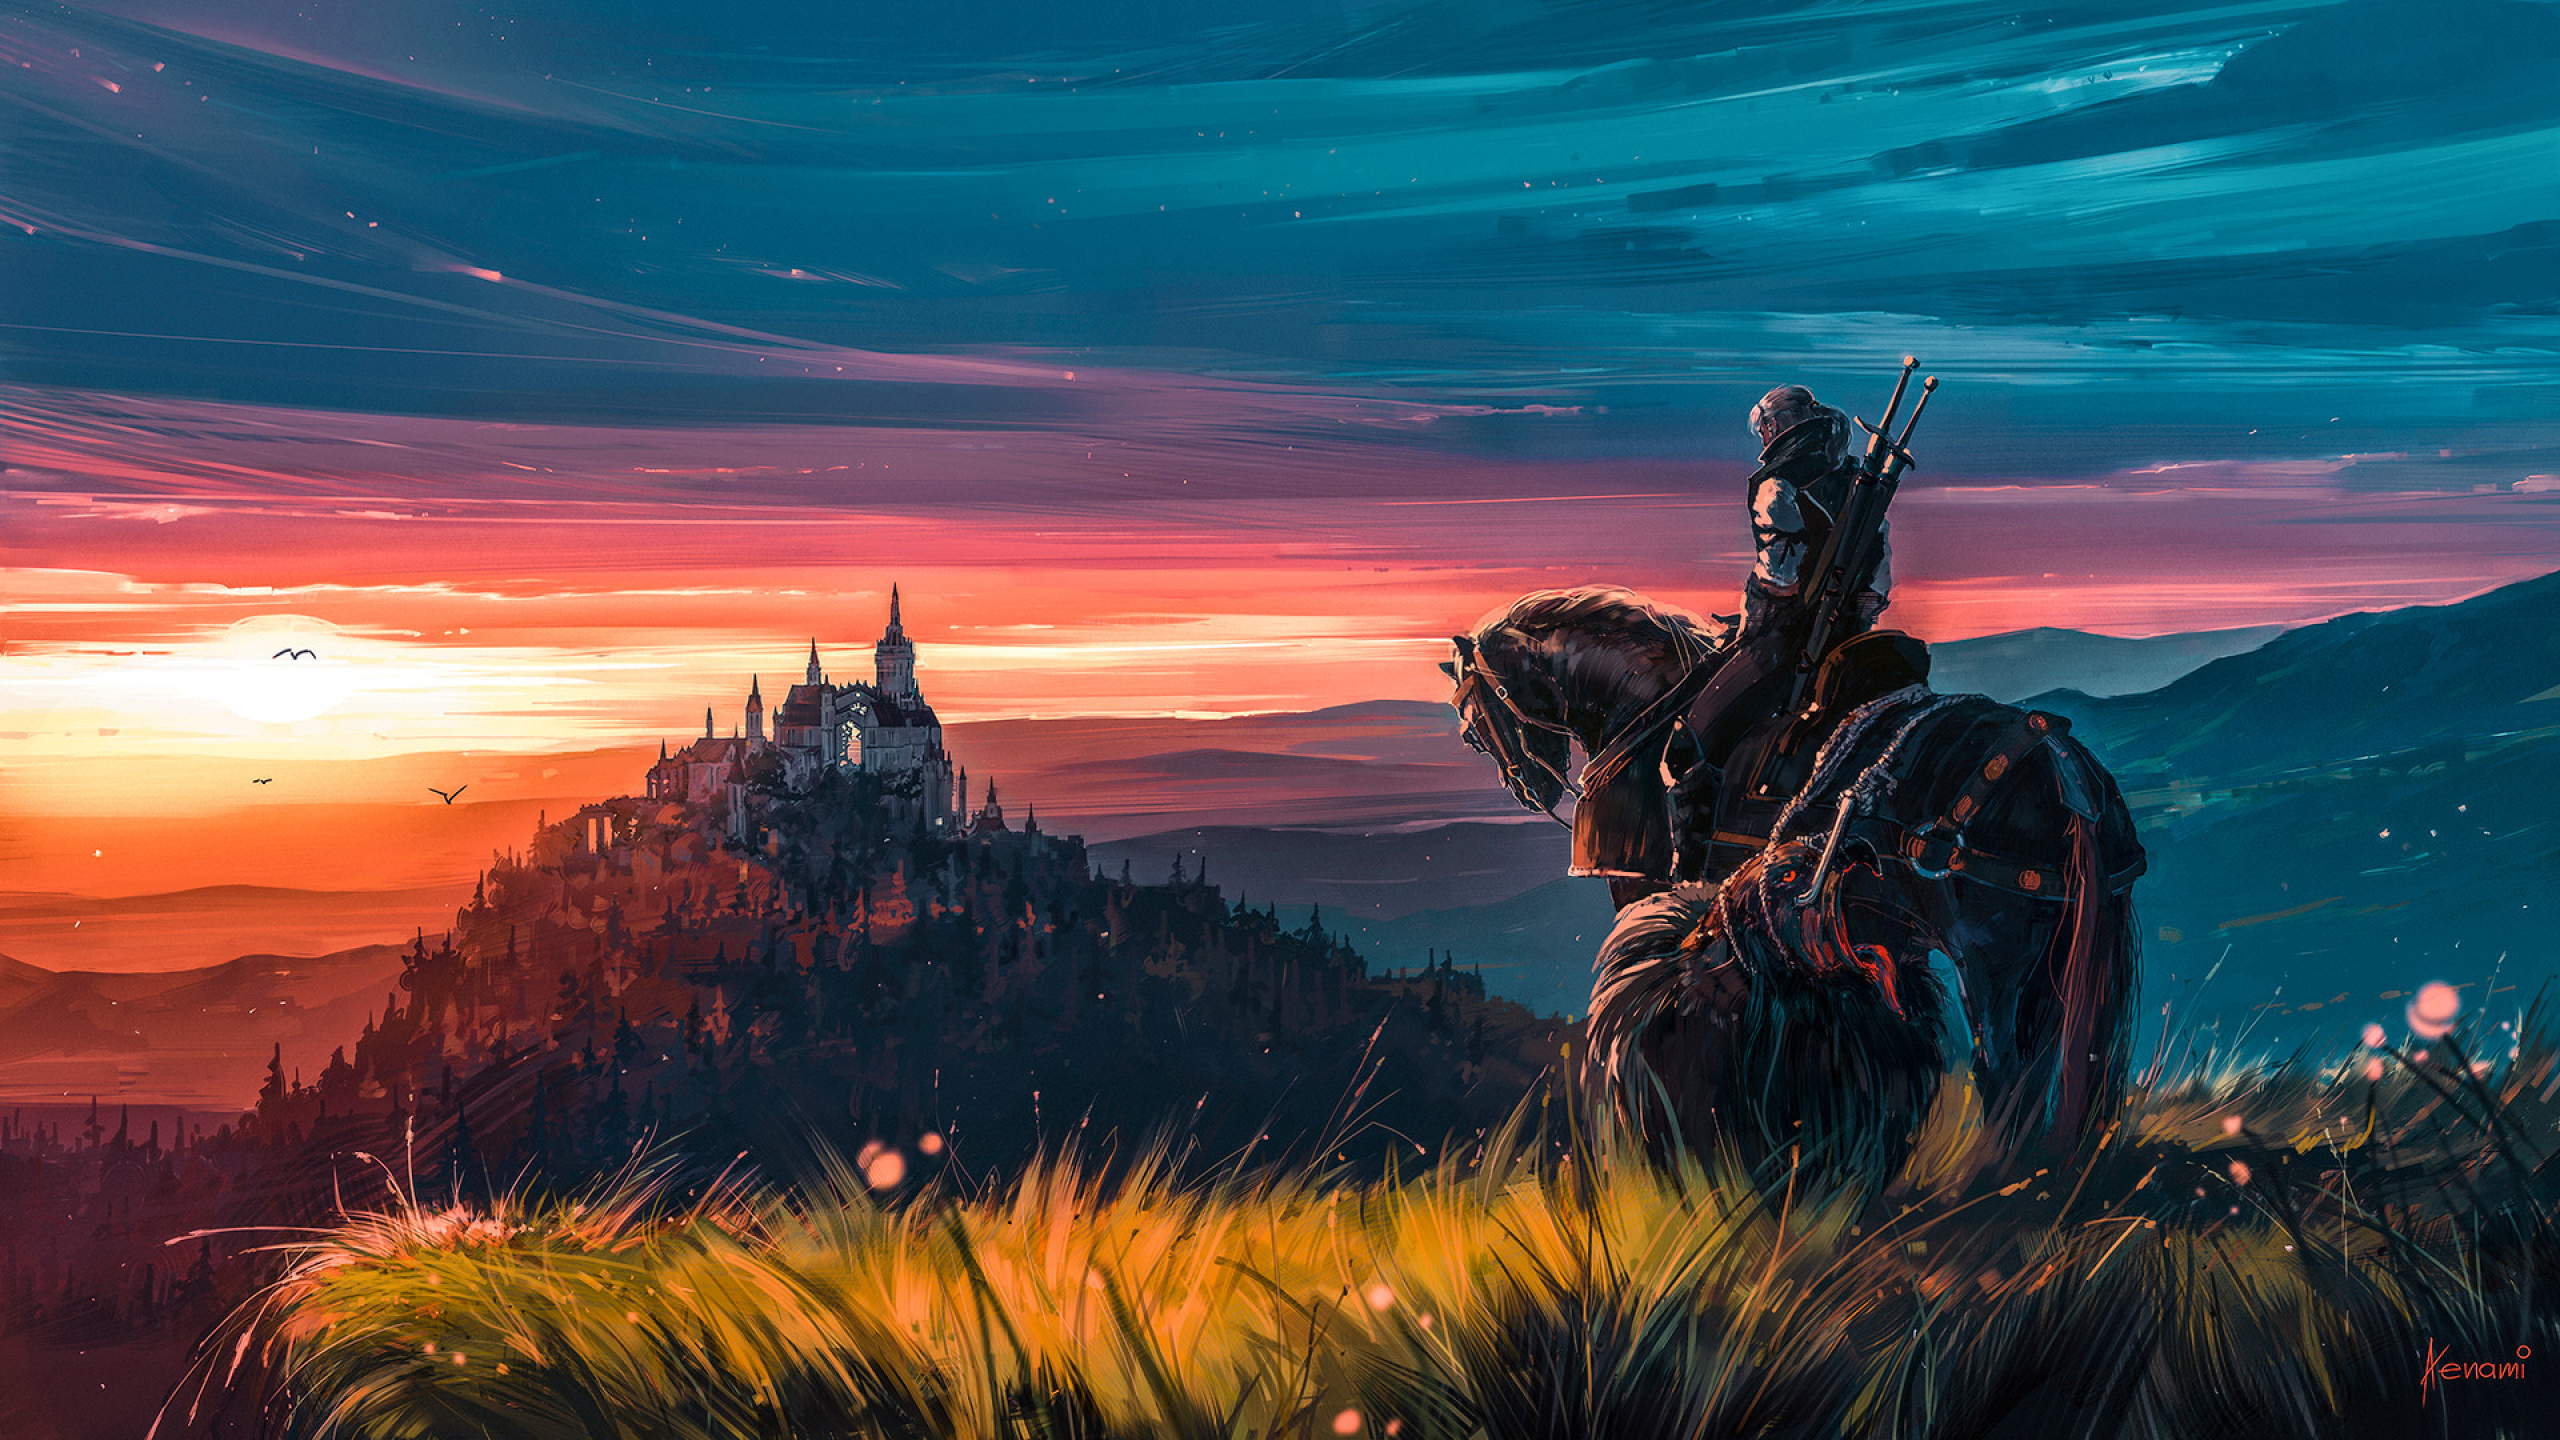 Free Download and Printable of The Witcher 3 1440p Wallpaper ~ Joanna